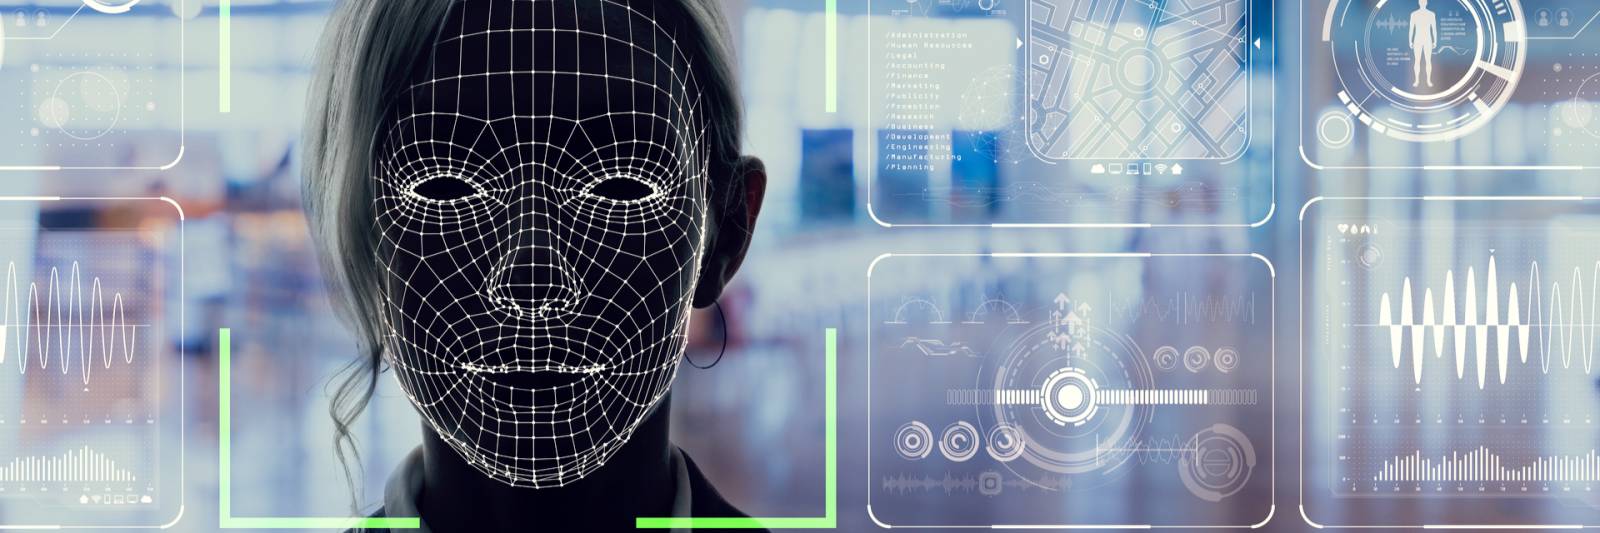 the pros and cons of facial recognition technology